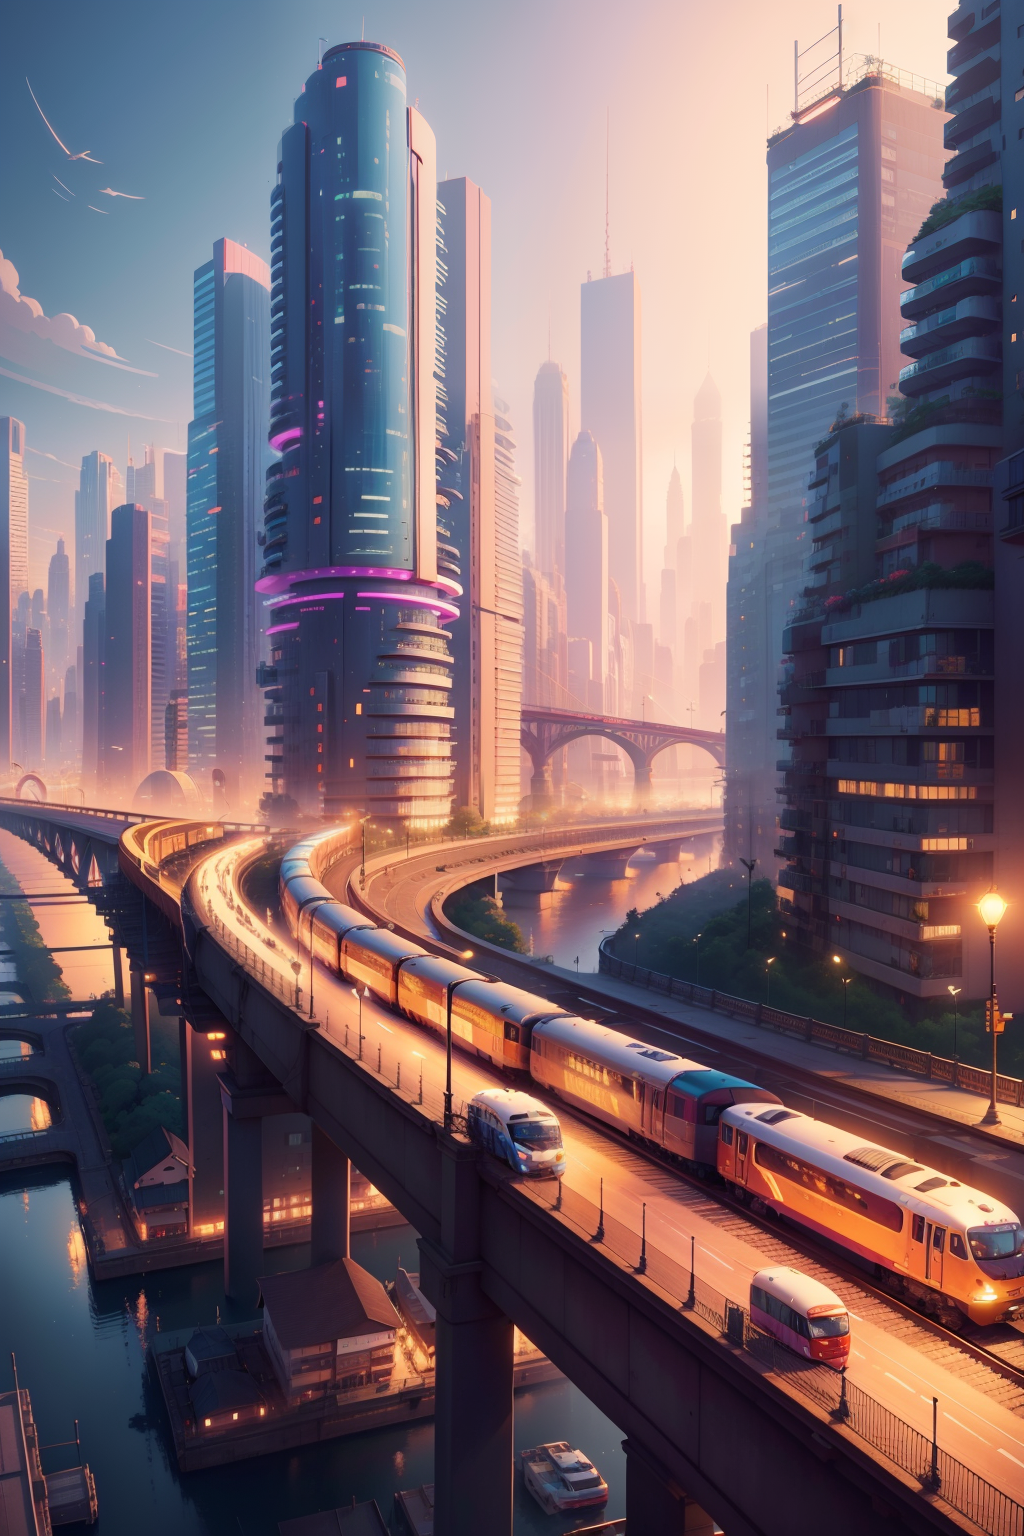 Future of Sustainable Transportation: Daily Eco-Friendly Commutes